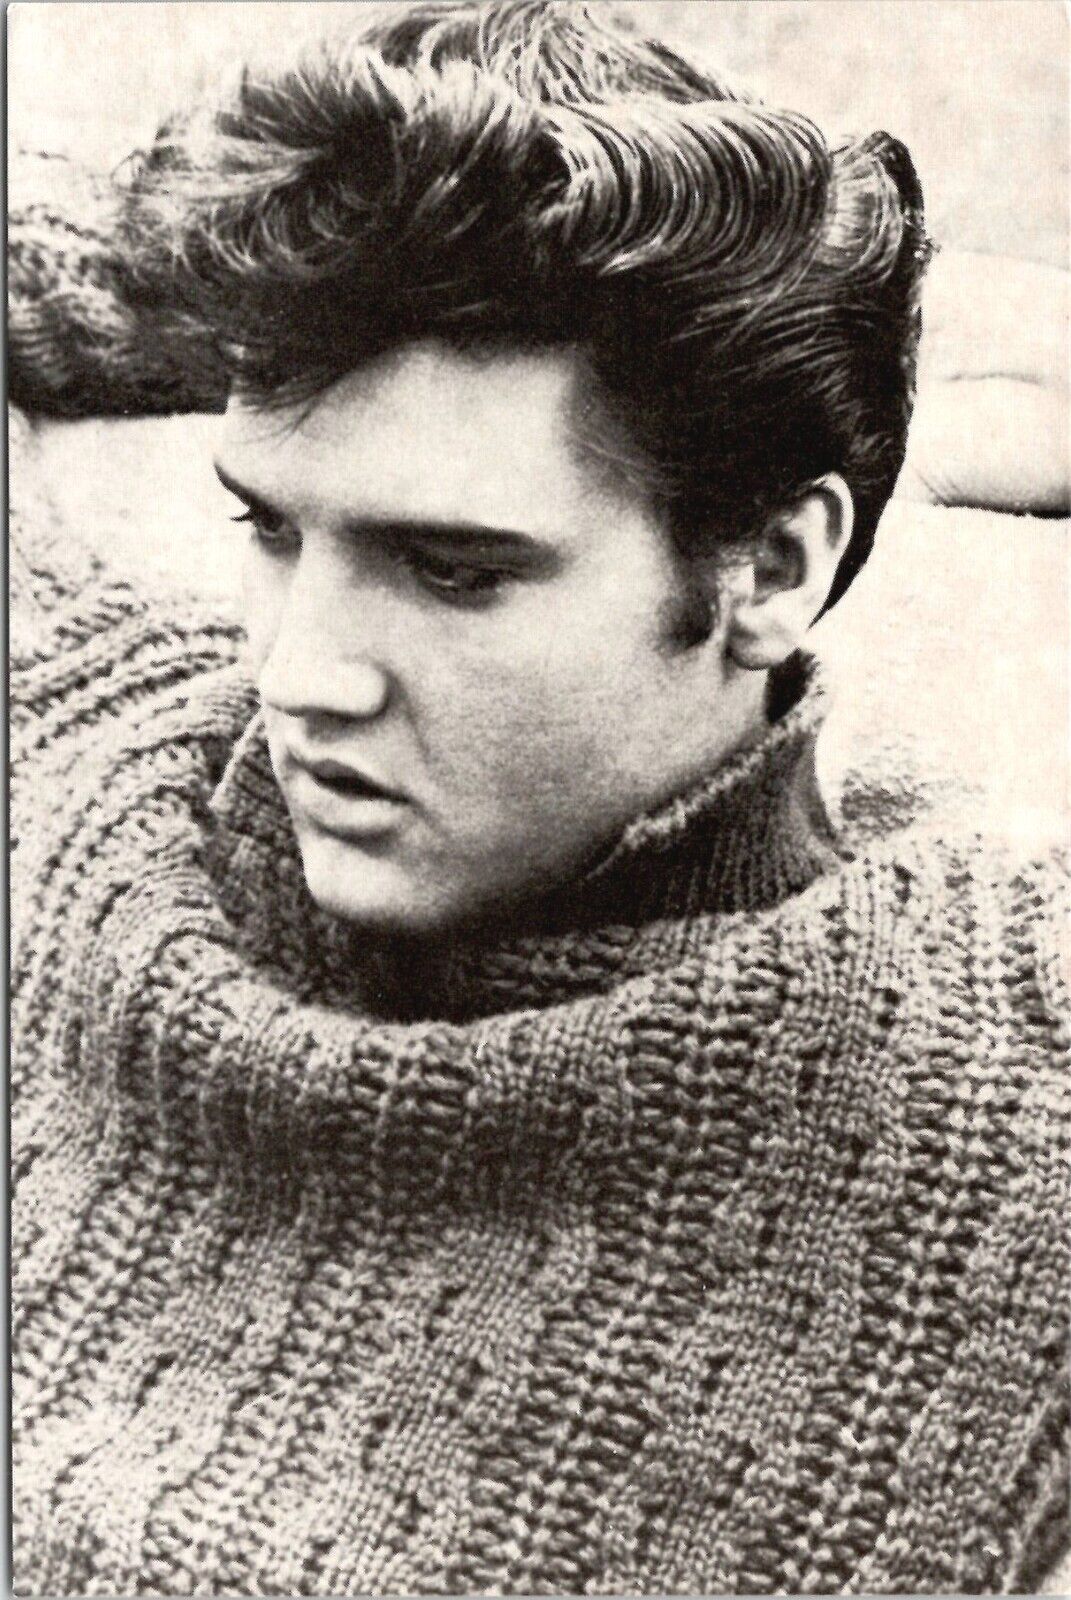 Elvis Aaron Presley in a Cable Knit Sweater - Postcard Unposted